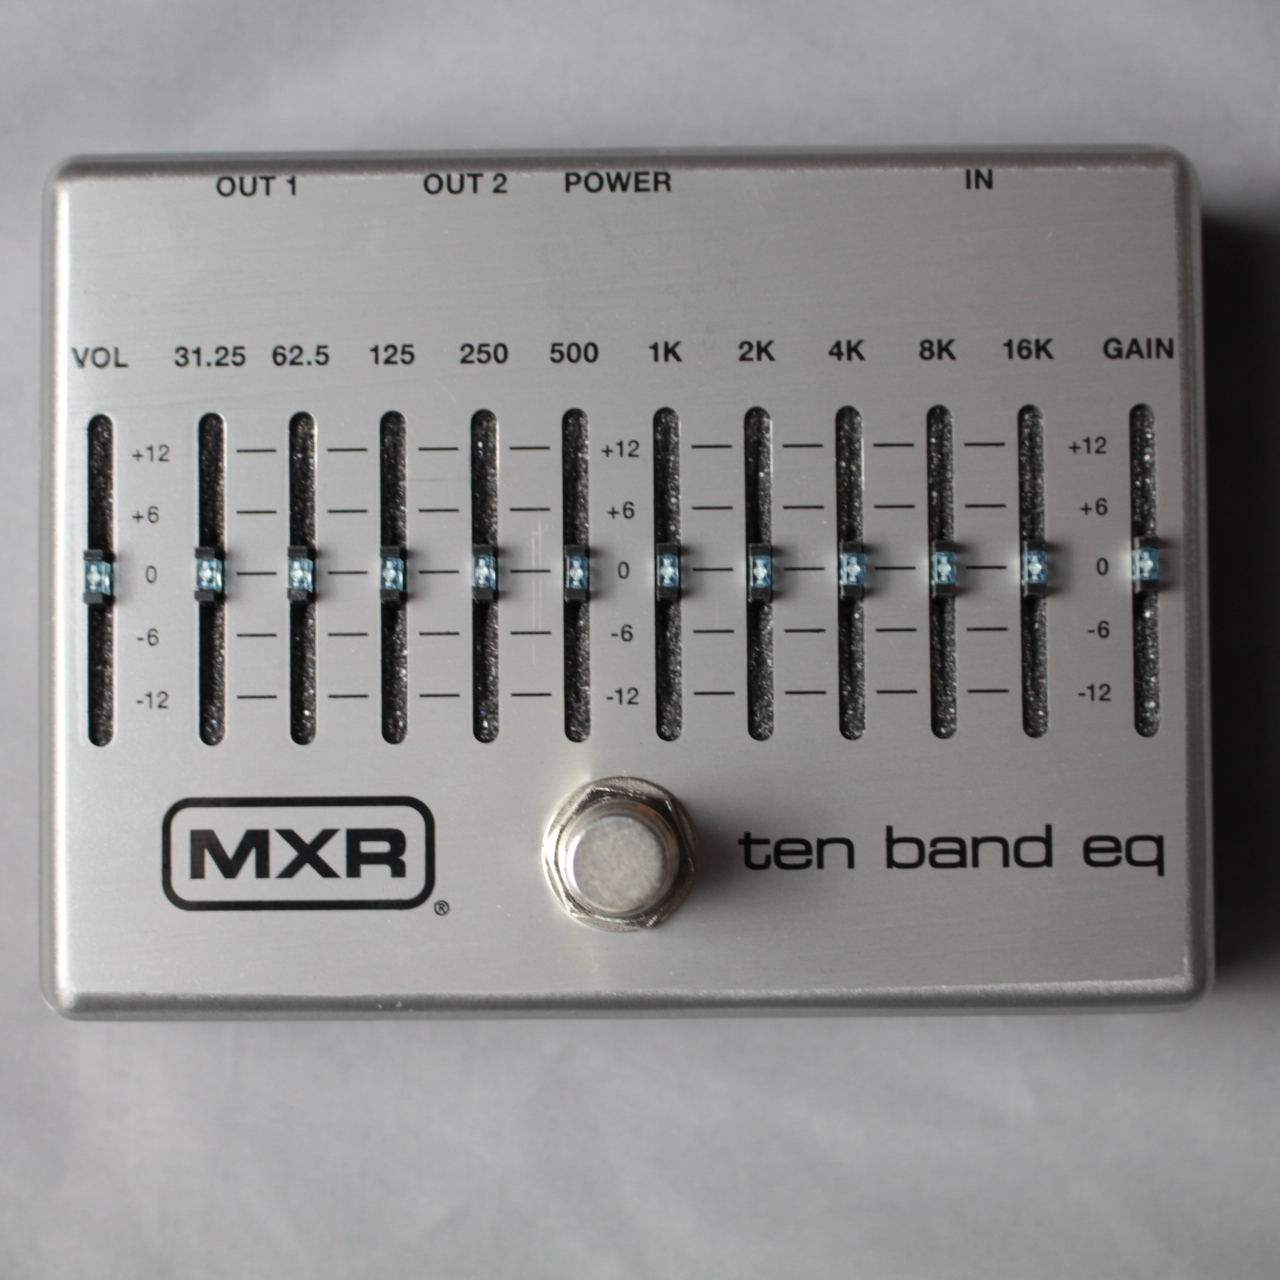 SEAL限定商品】 MXR M108S ten band eq グラフィックイコライザー